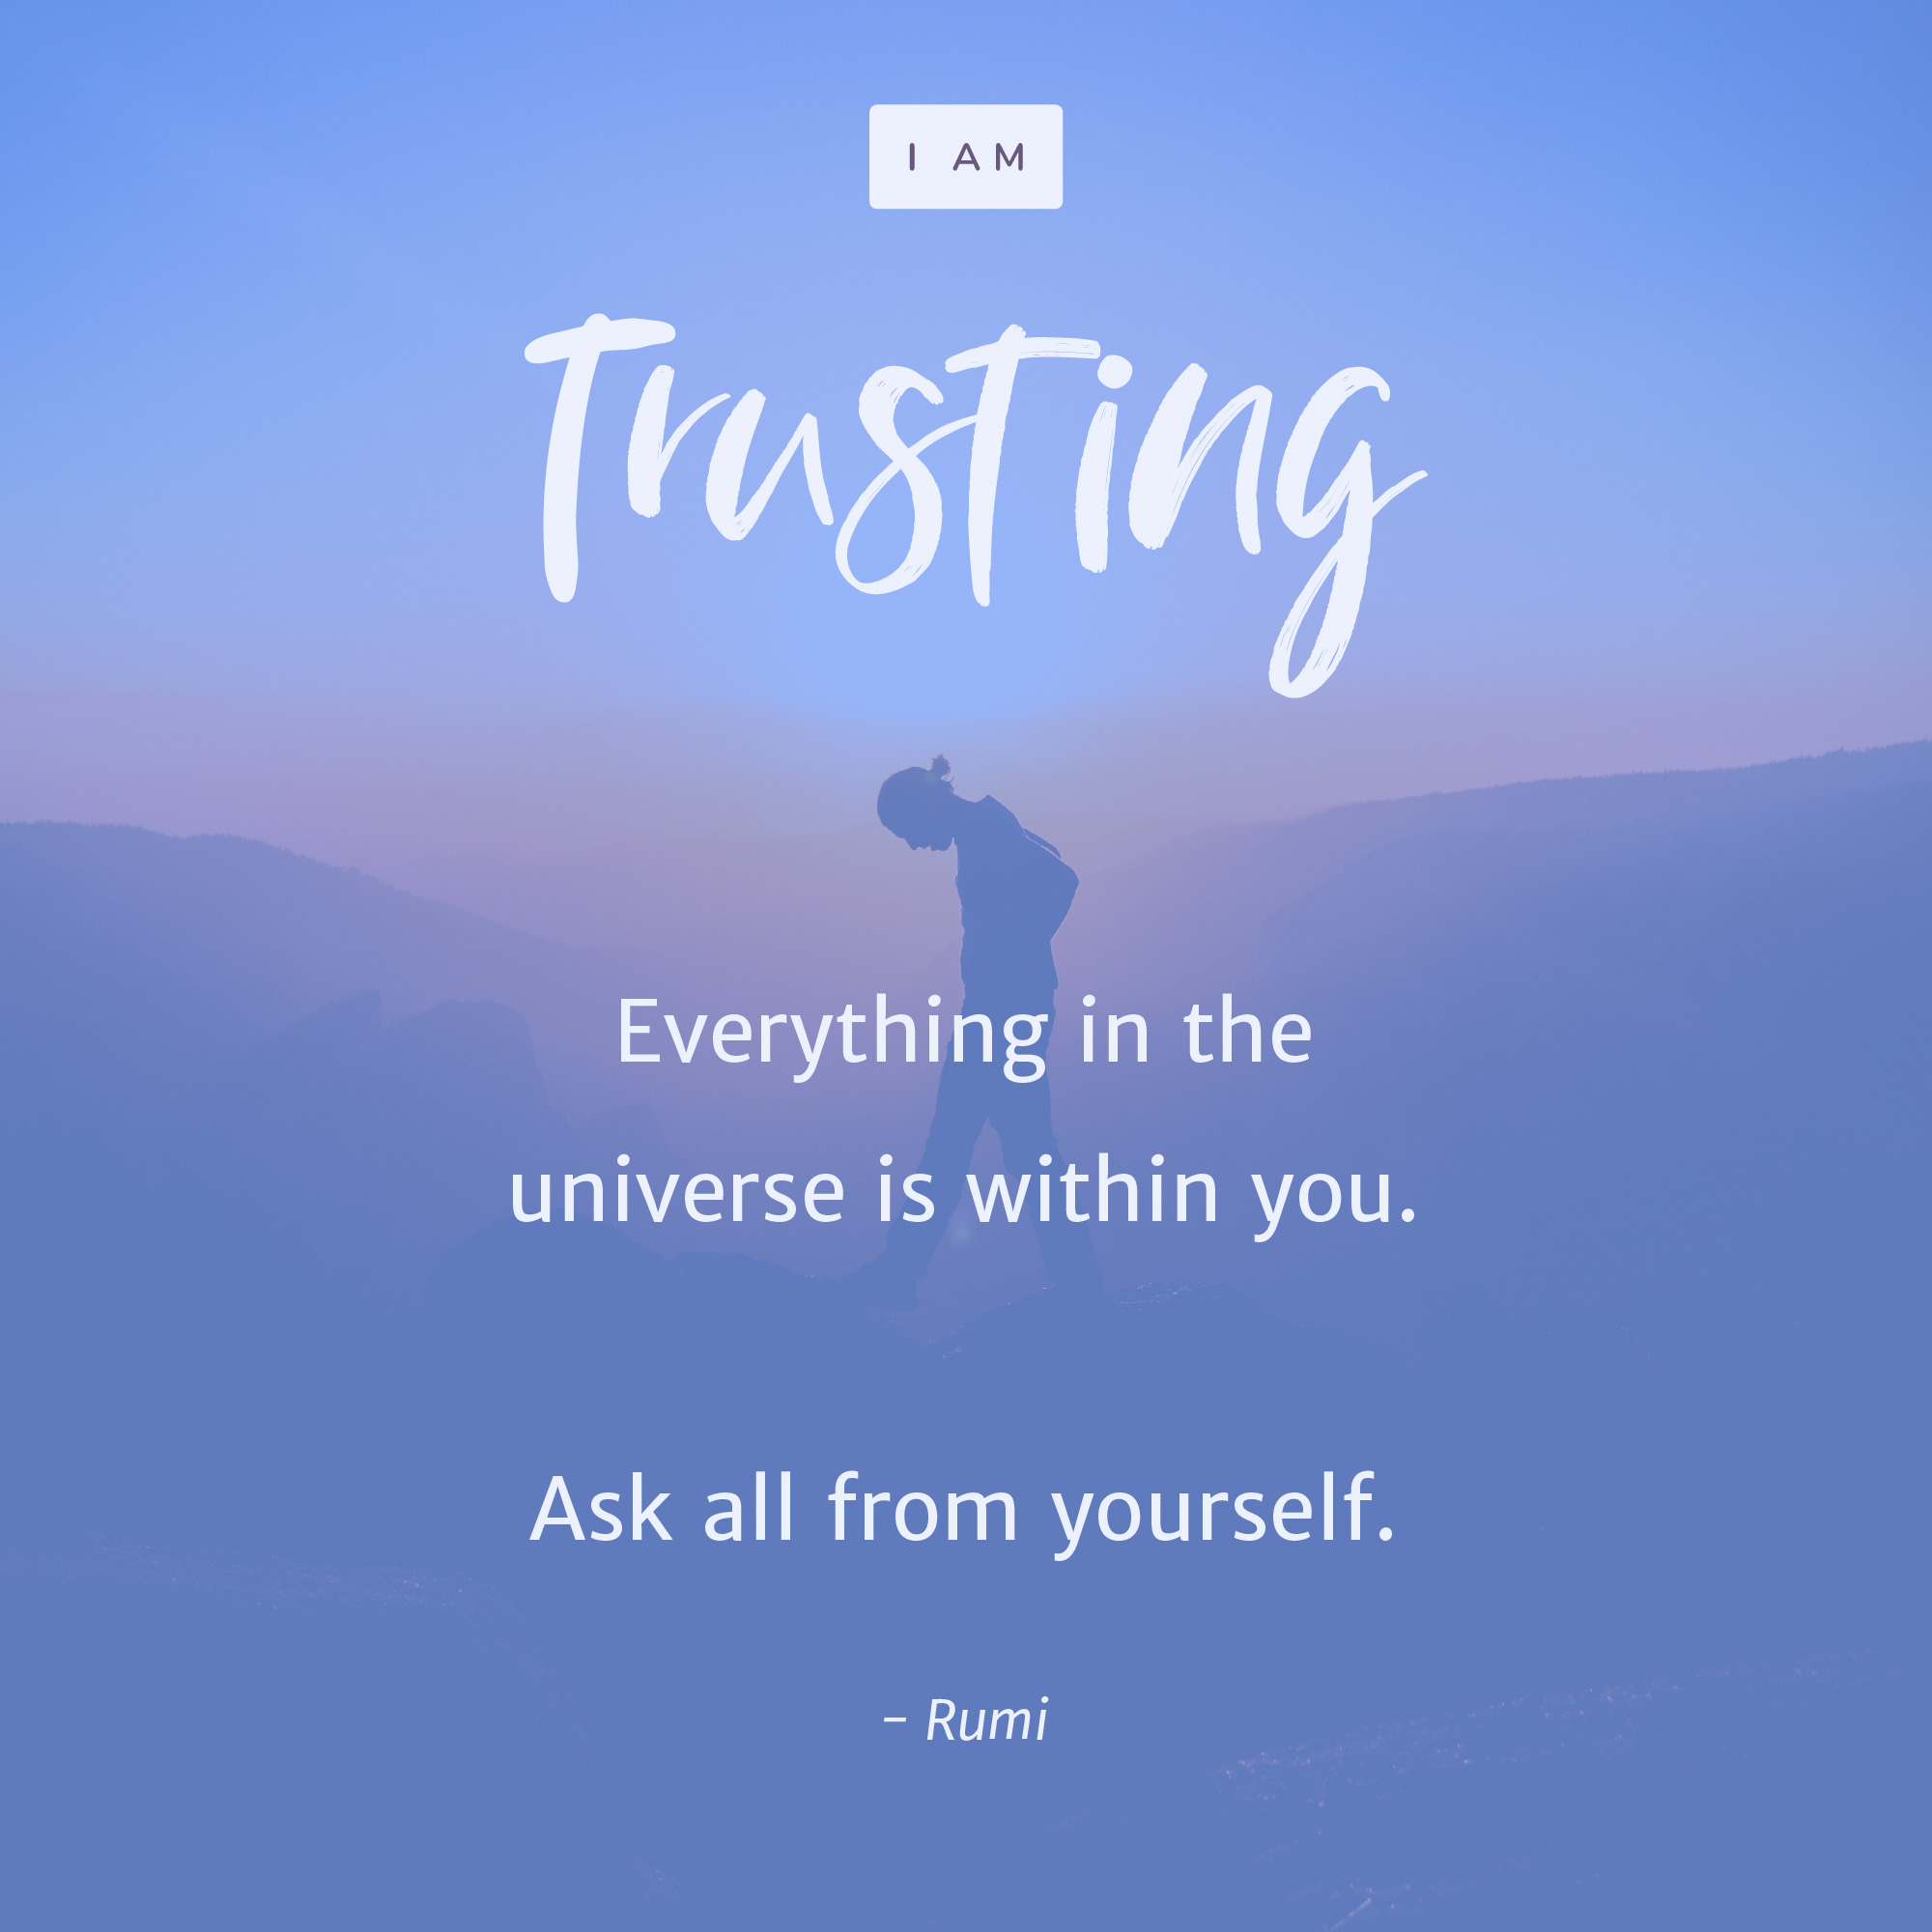 Everything in the universe is within you. -Rumi